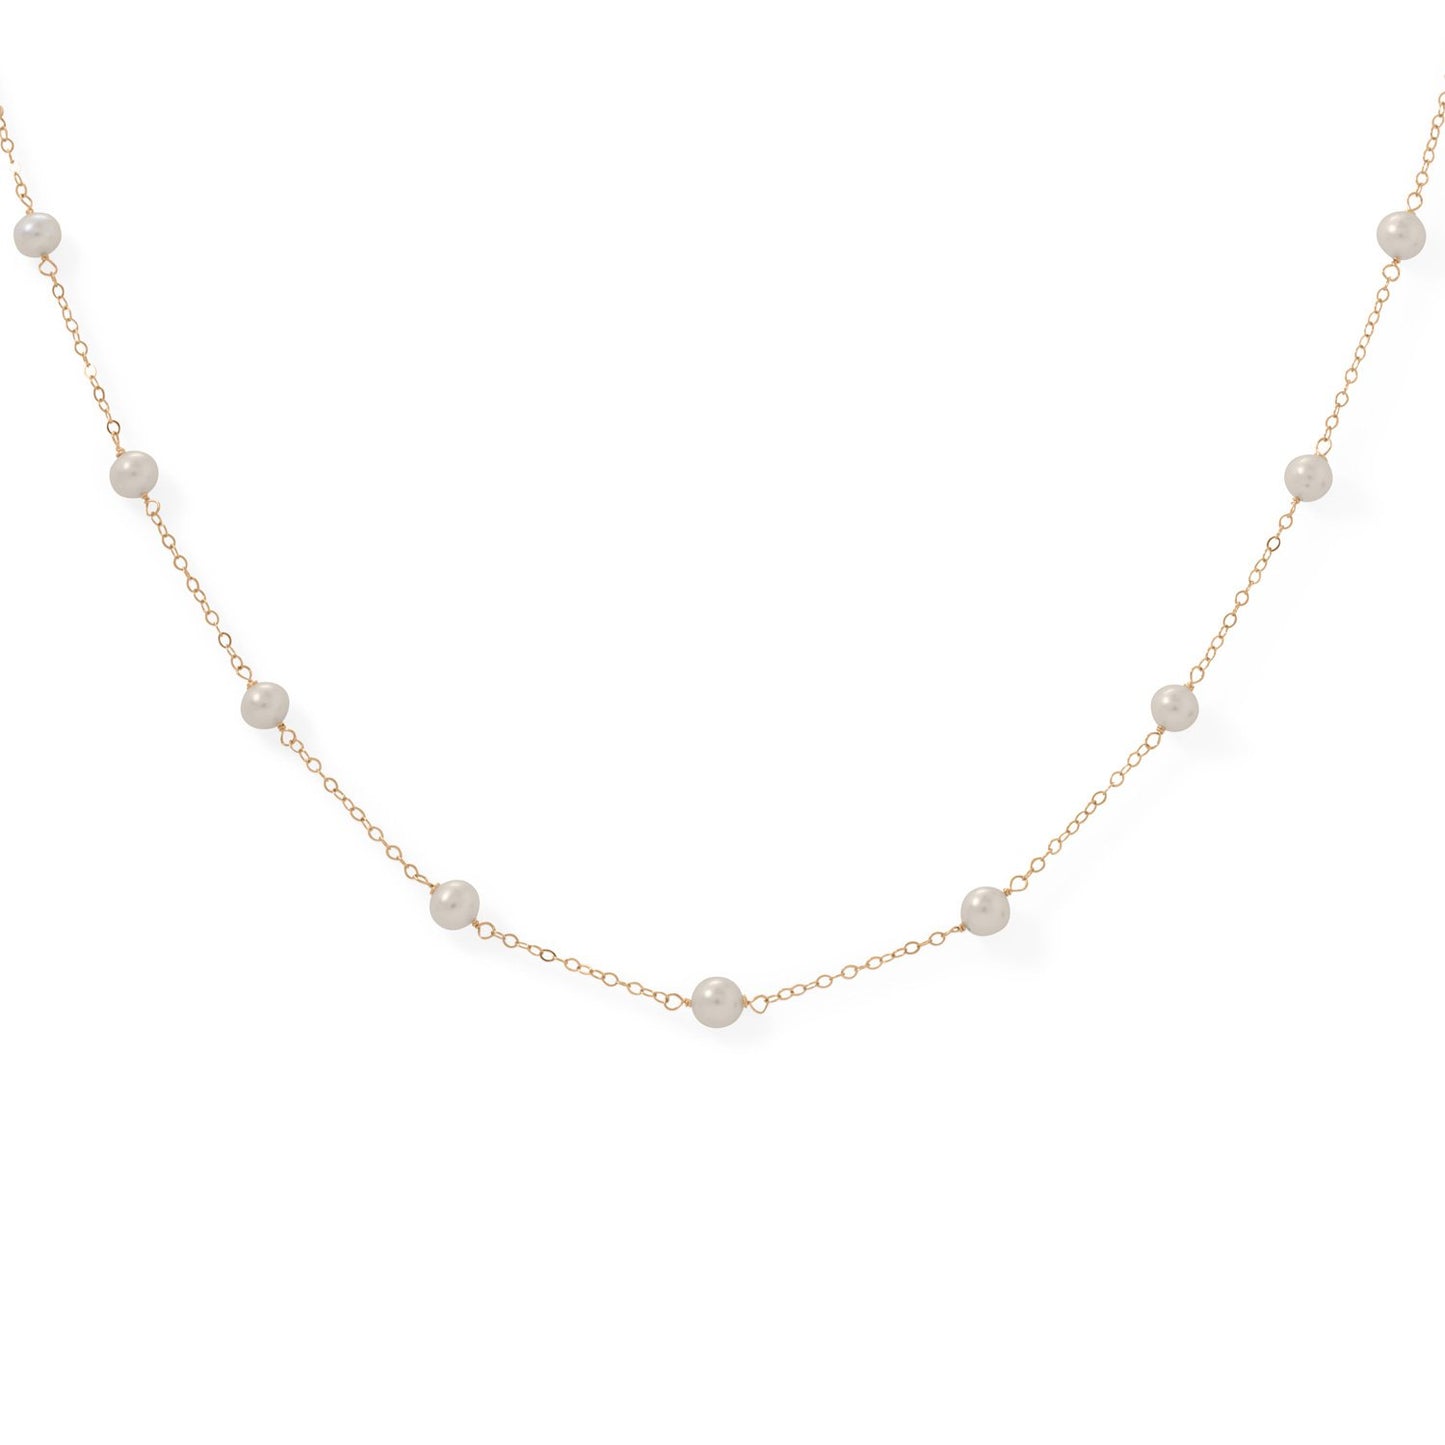 Gold Filled 9 Cultured Freshwater Pearl 16" Necklace